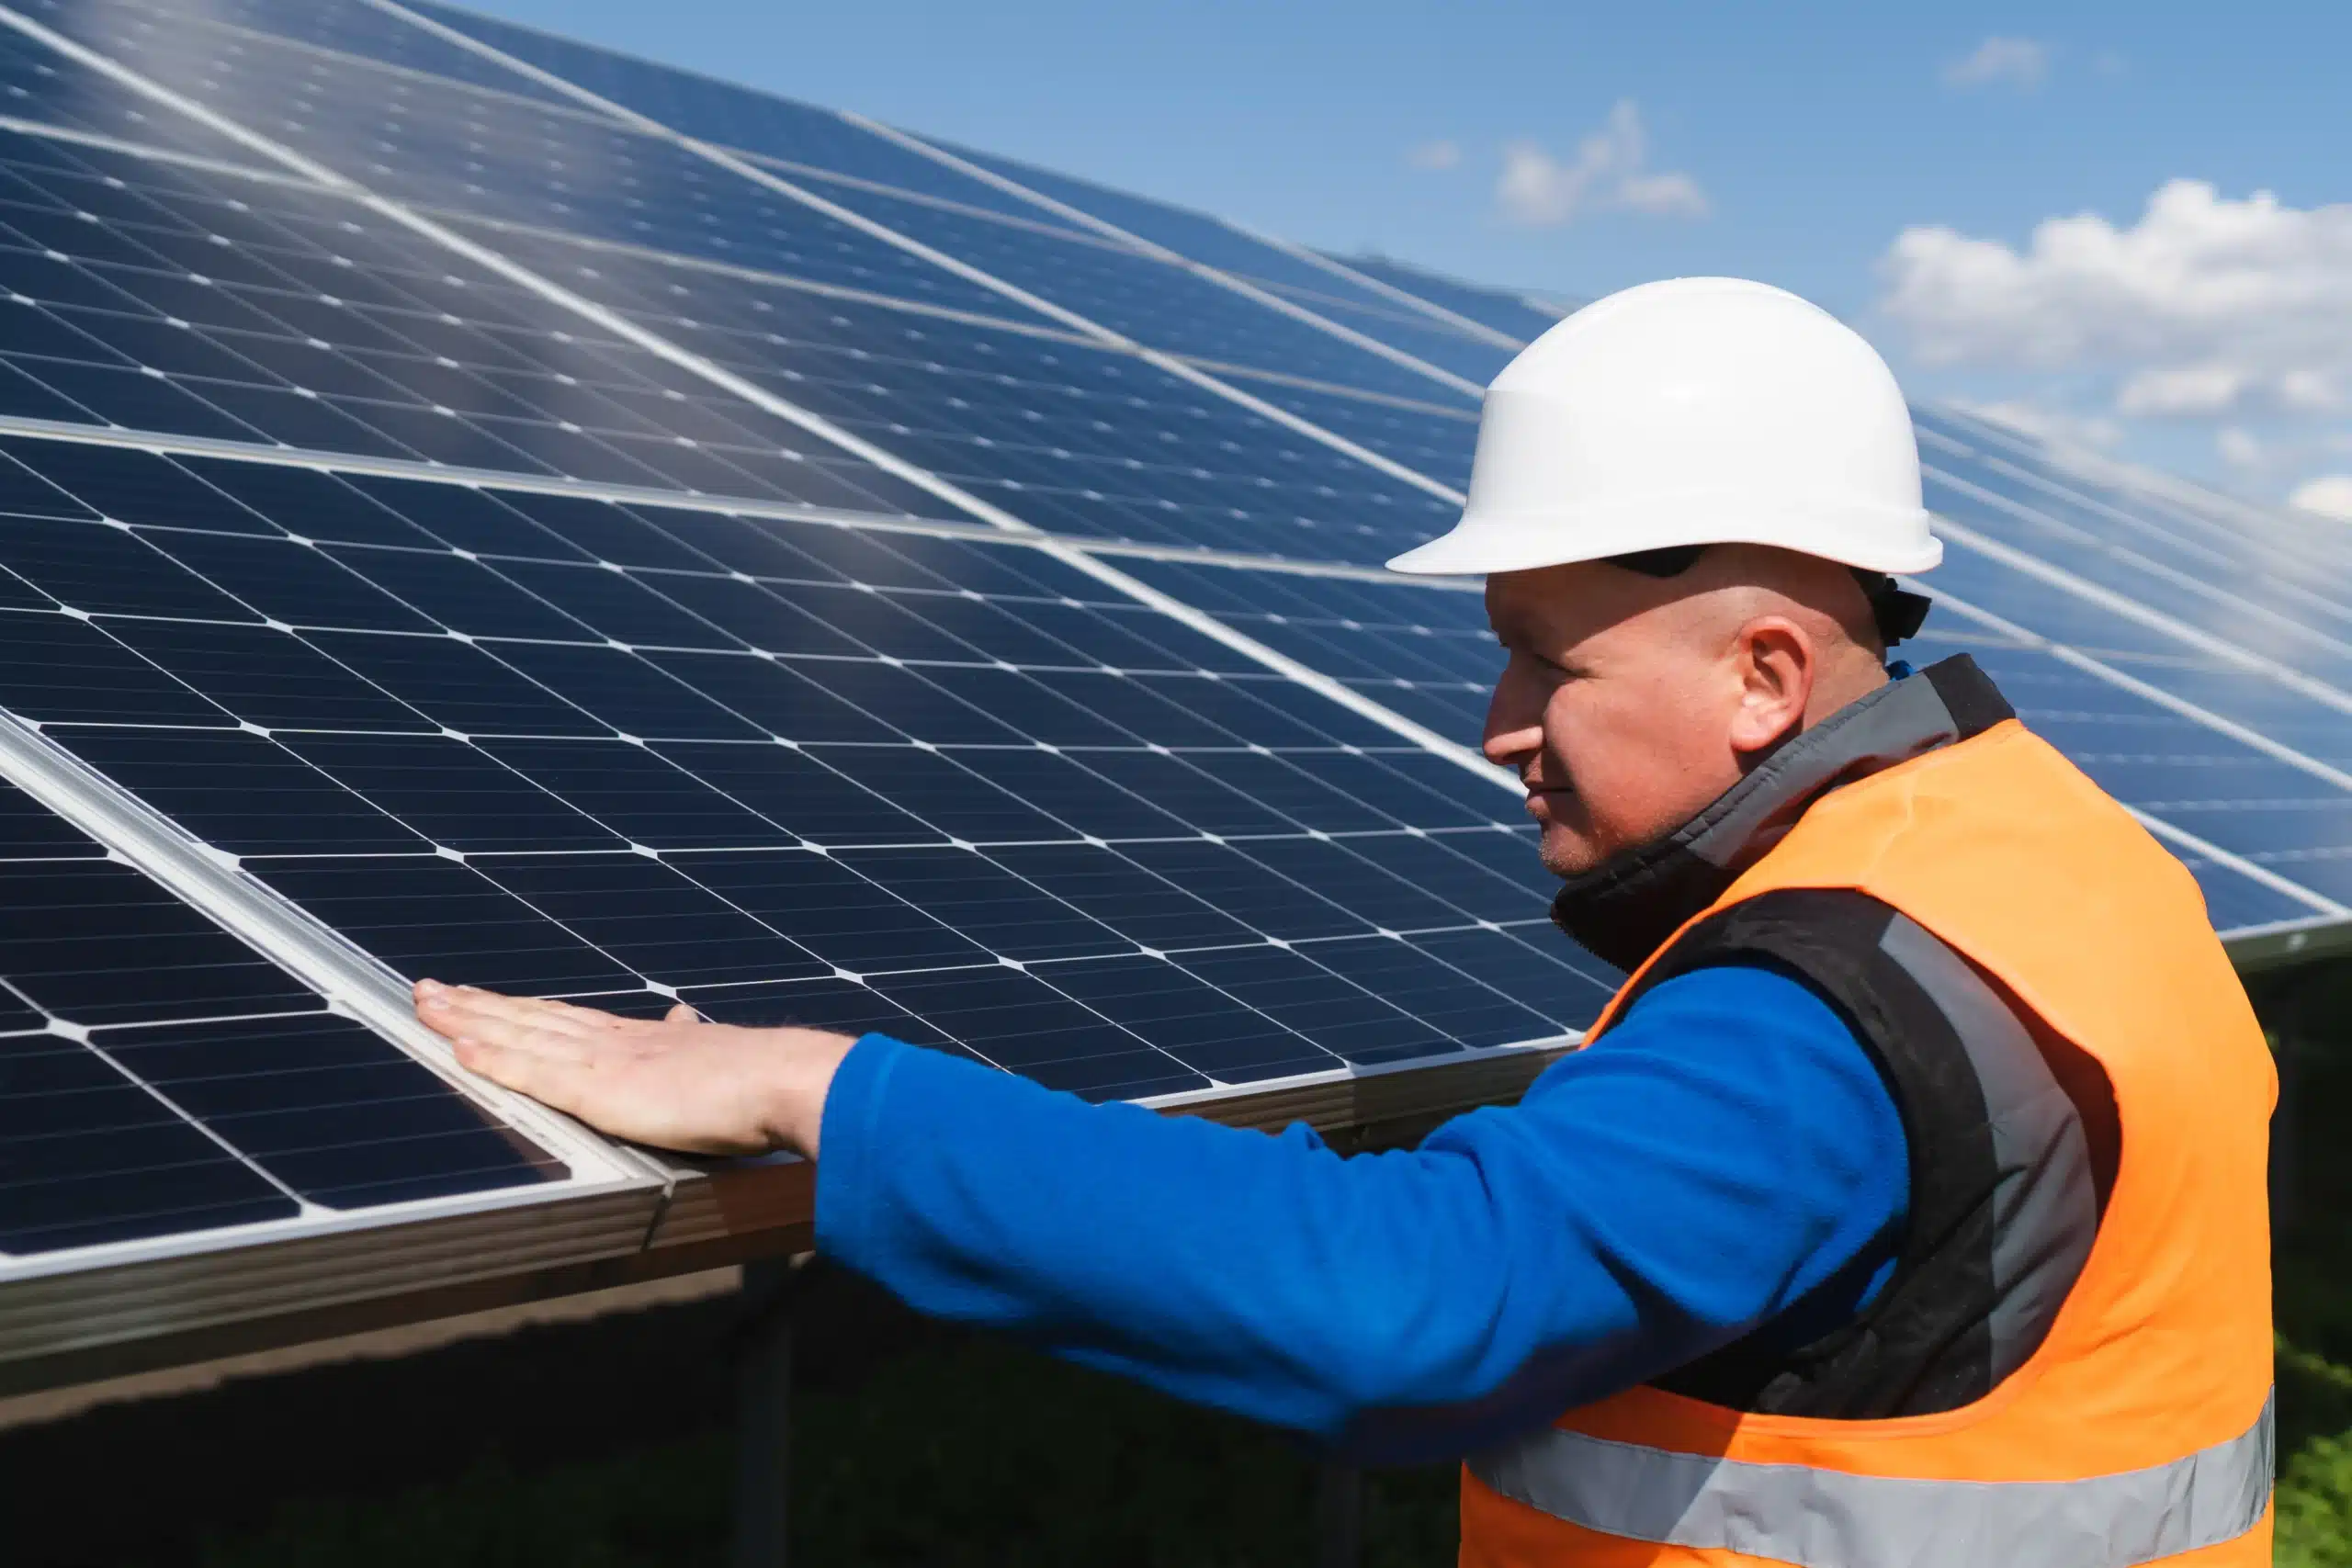 Does Homeowners Insurance Cover Damaged Solar Panels?